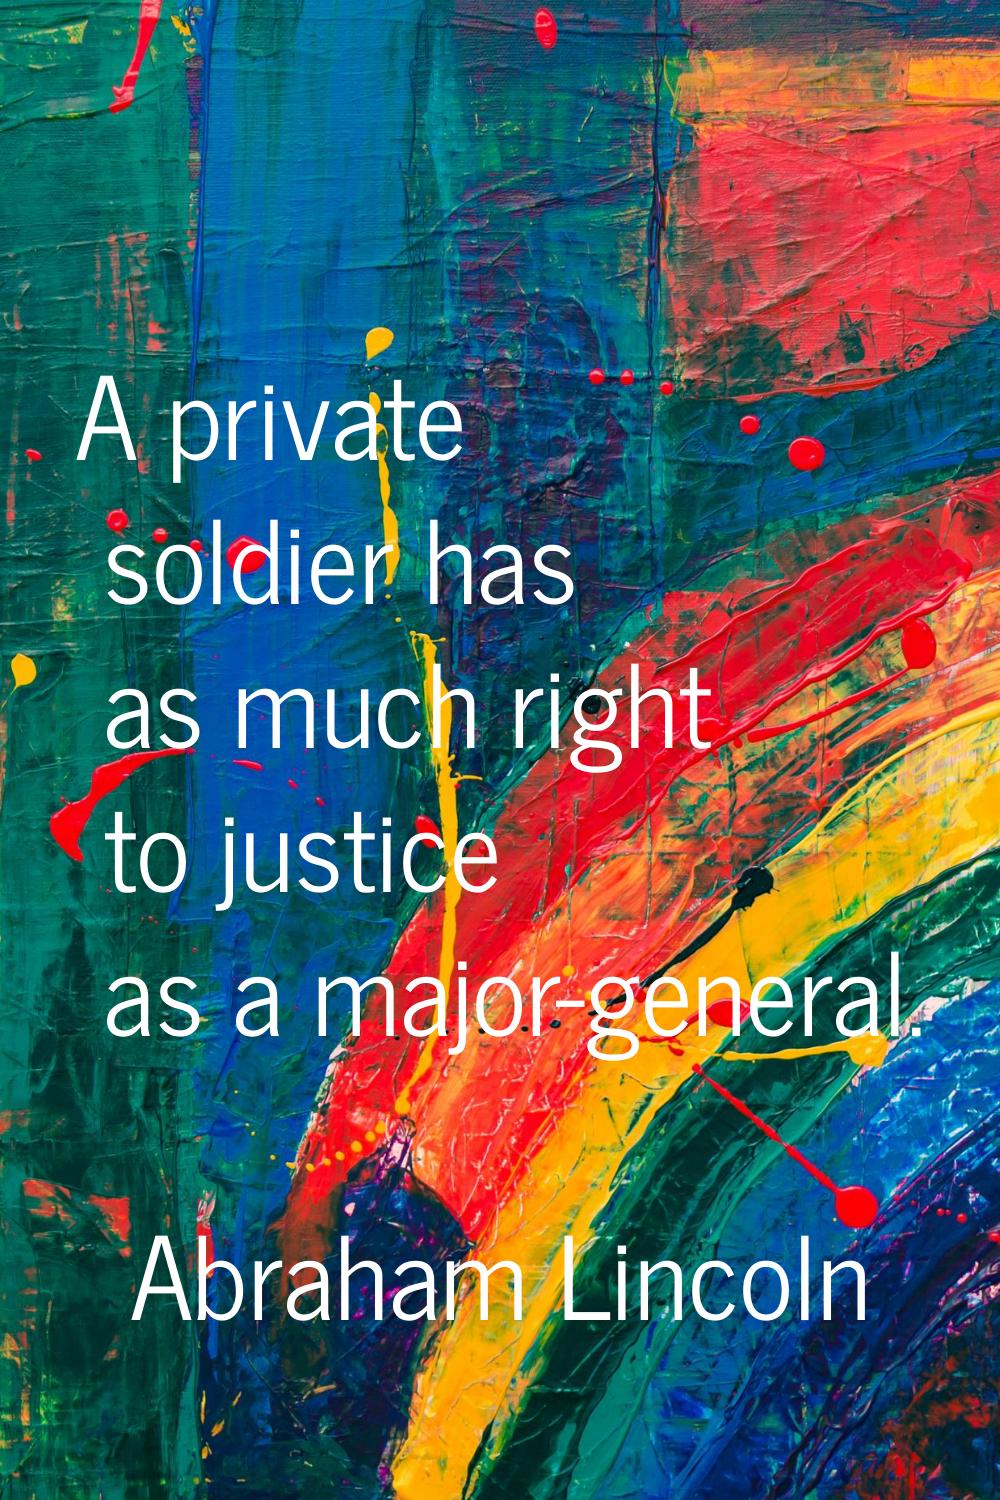 A private soldier has as much right to justice as a major-general.